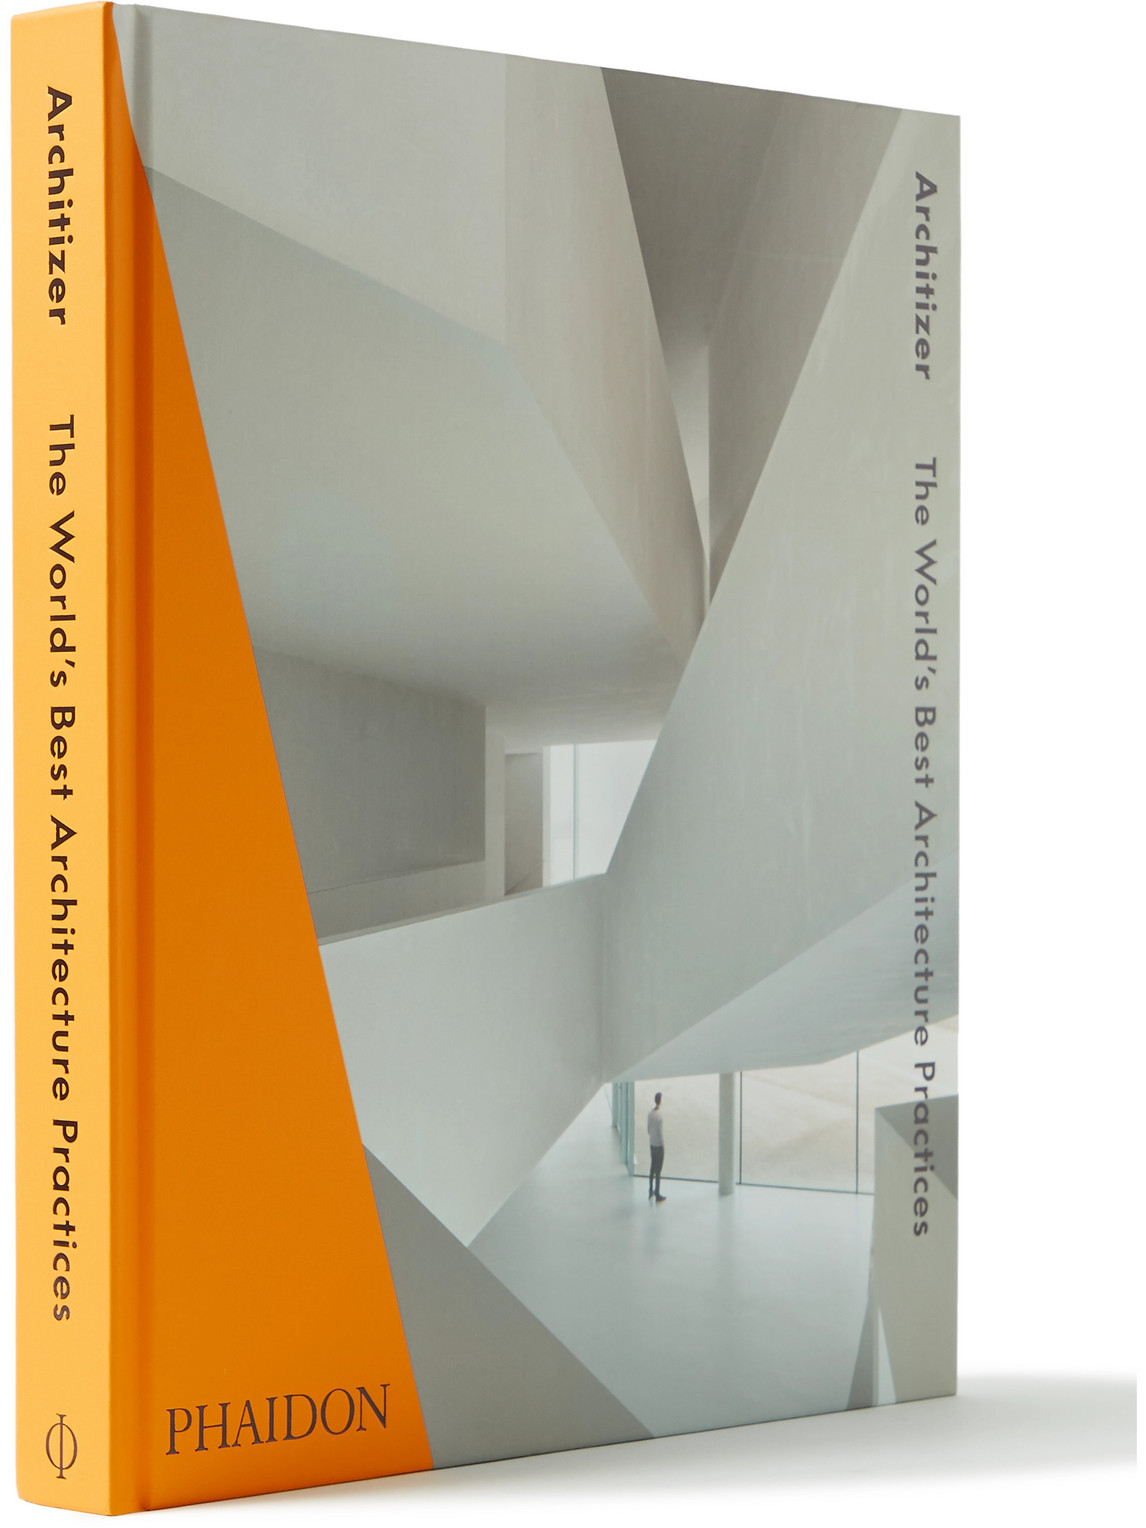 Phaidon Architizer: The World's Best Architecture Practices Hardcover Book In Orange